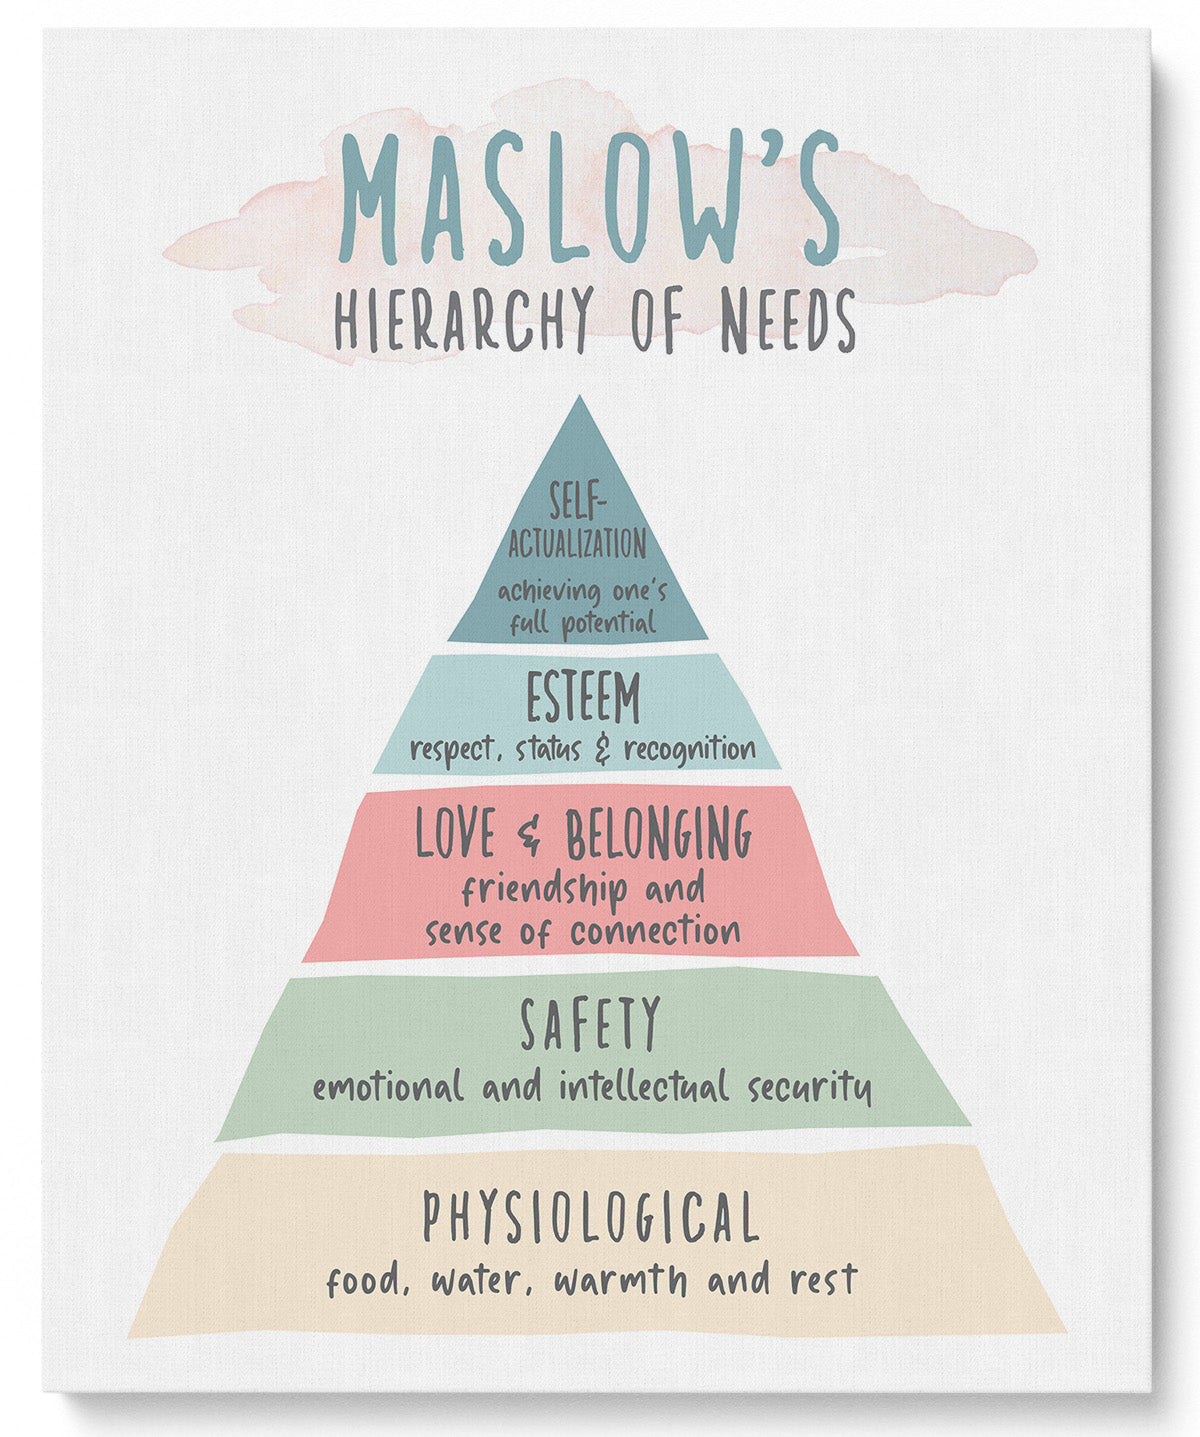 Maslows Hierarchy Of Needs - Psychotherapy or Psychologist Wall Art - Therapist Office Decor - Mental Health Home Wall Decor - Living Room and Bedroom Decor